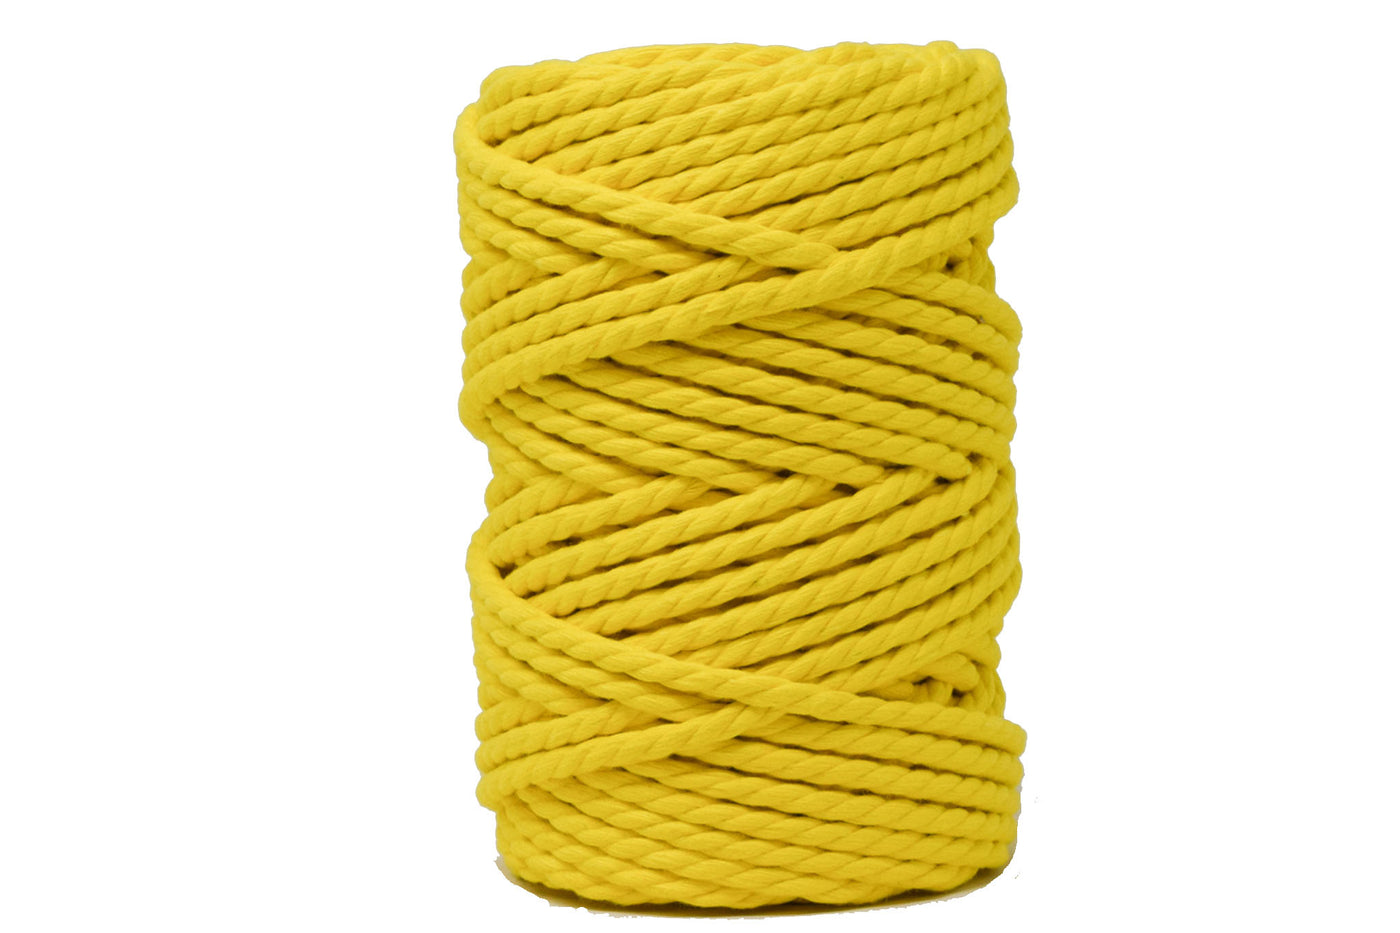 COTTON ROPE ZERO WASTE 5 MM - 3 PLY  - YELLOW COLOR